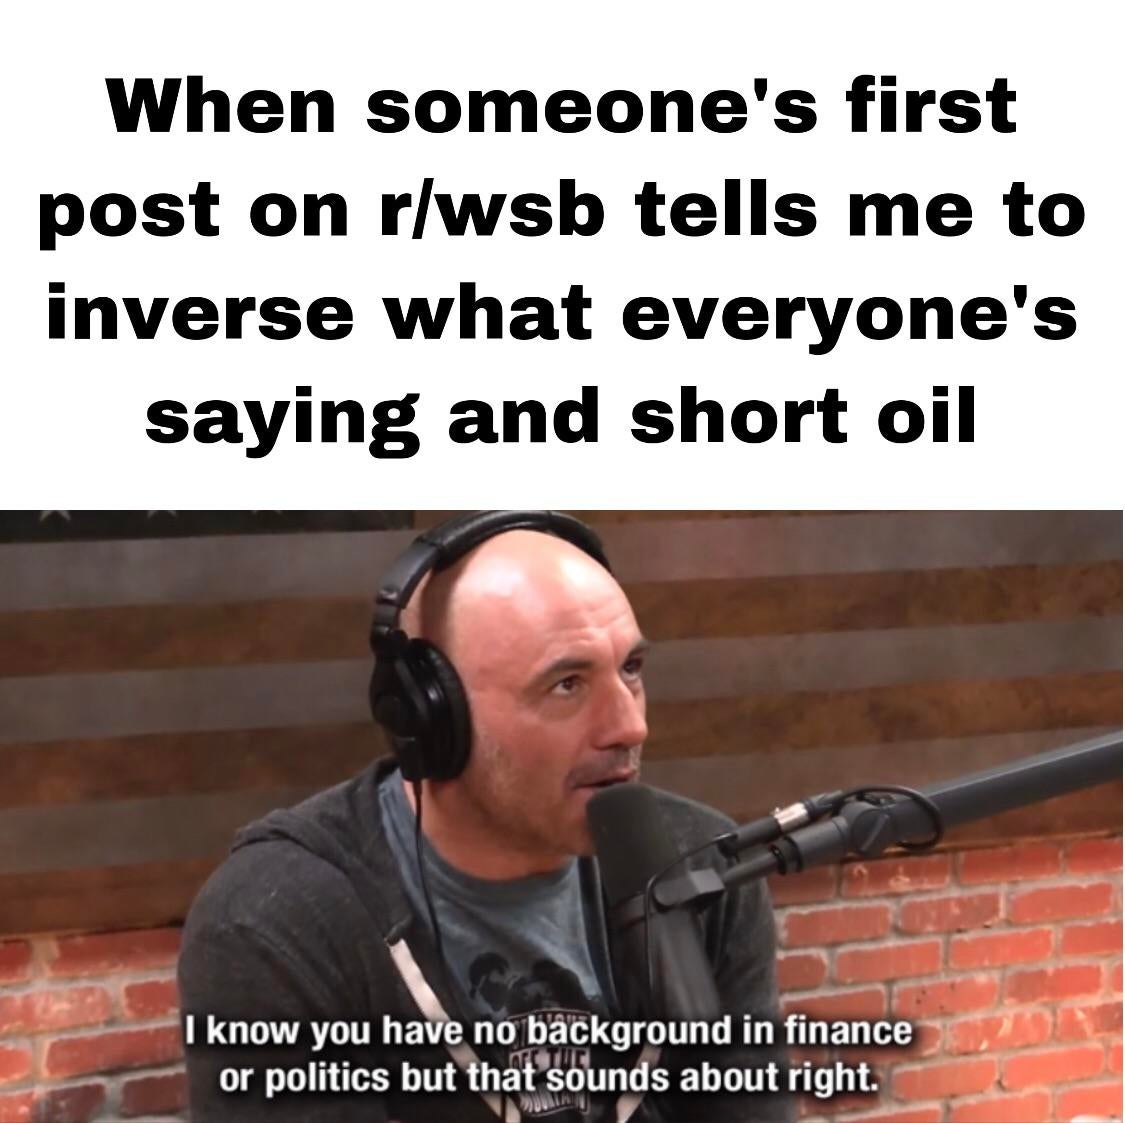 photo caption - When someone's first post on r wsb tells me to inverse what everyone's saying and short oil I know you have no background in finance or politics but that sounds about right.